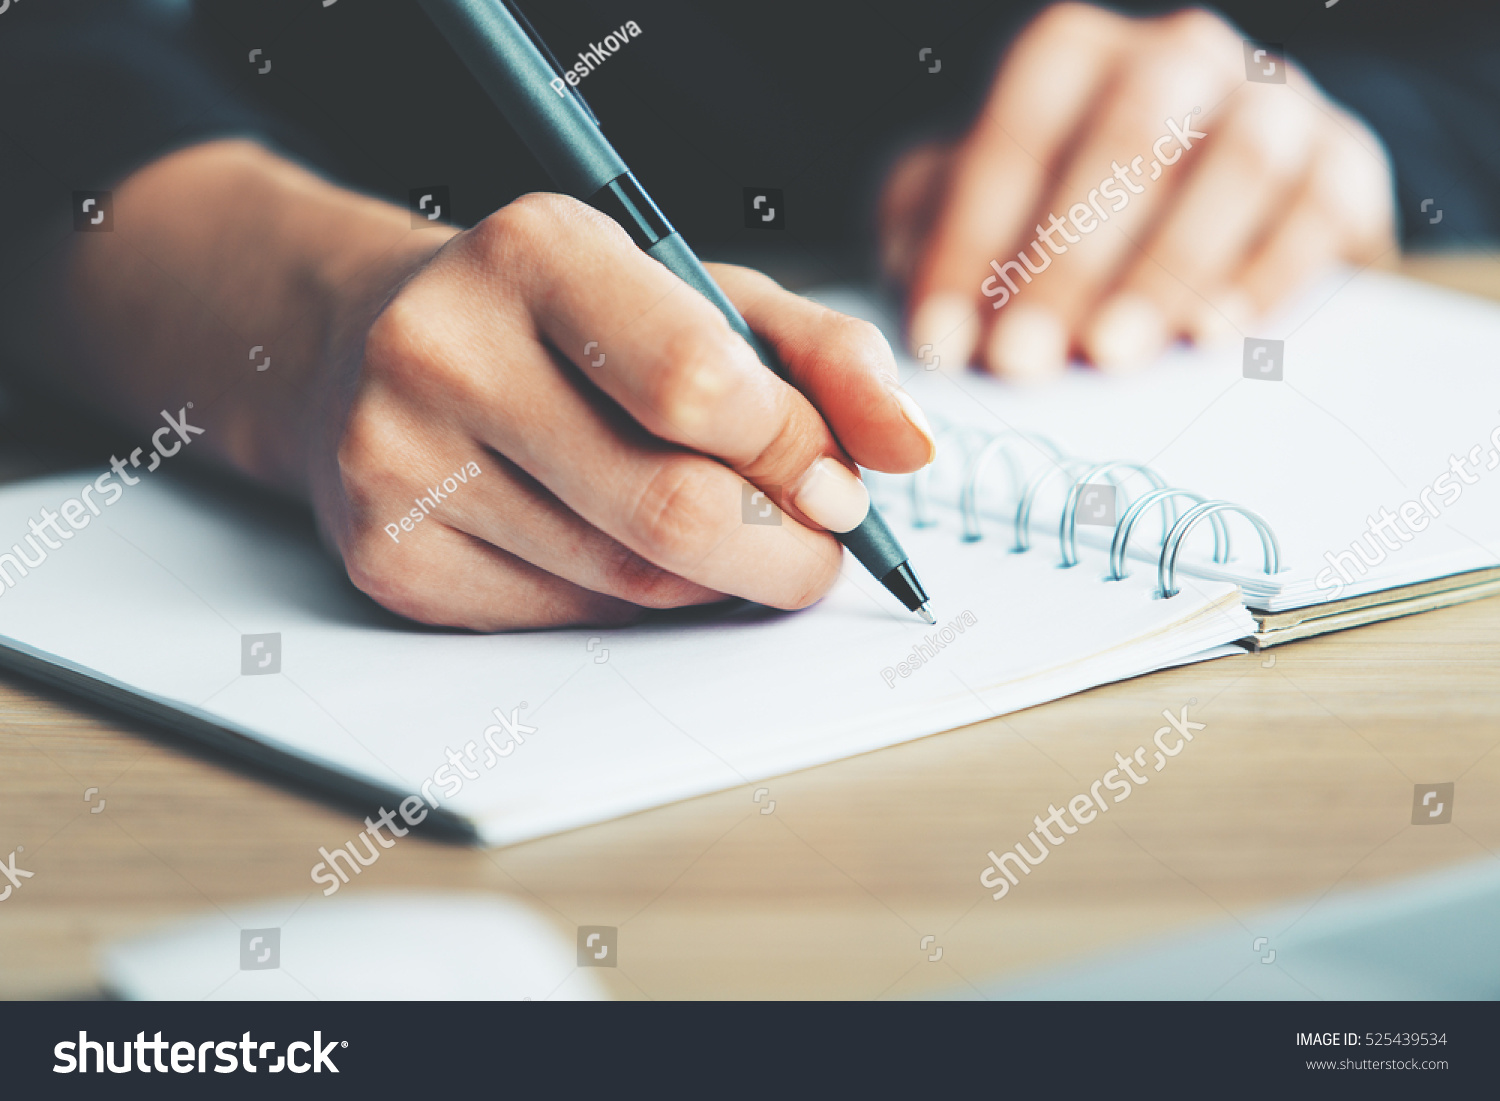 Close up of woman's hands writing in spiral notepad placed on wooden desktop with various items #525439534